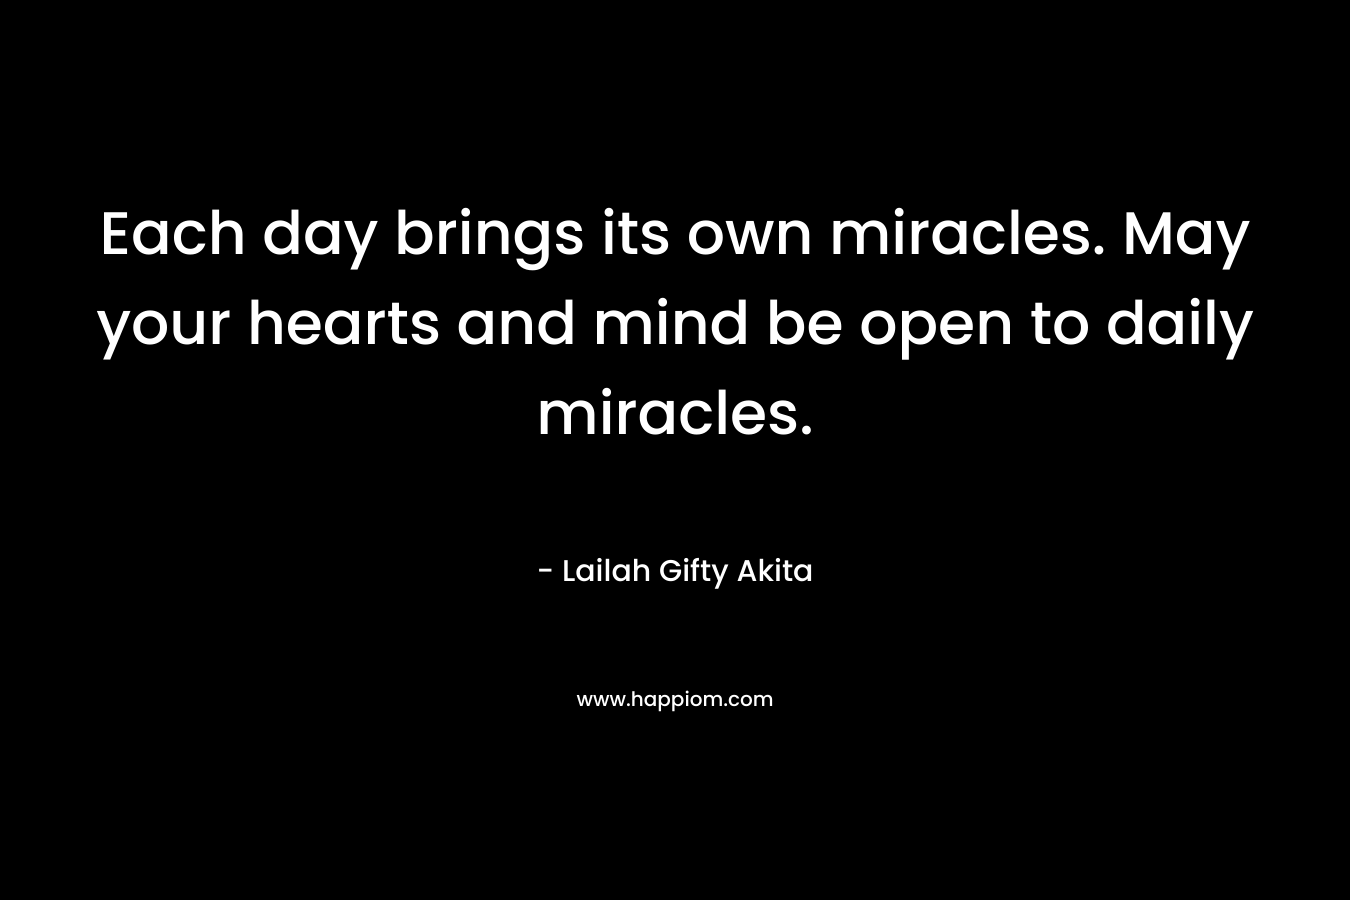 Each day brings its own miracles. May your hearts and mind be open to daily miracles.